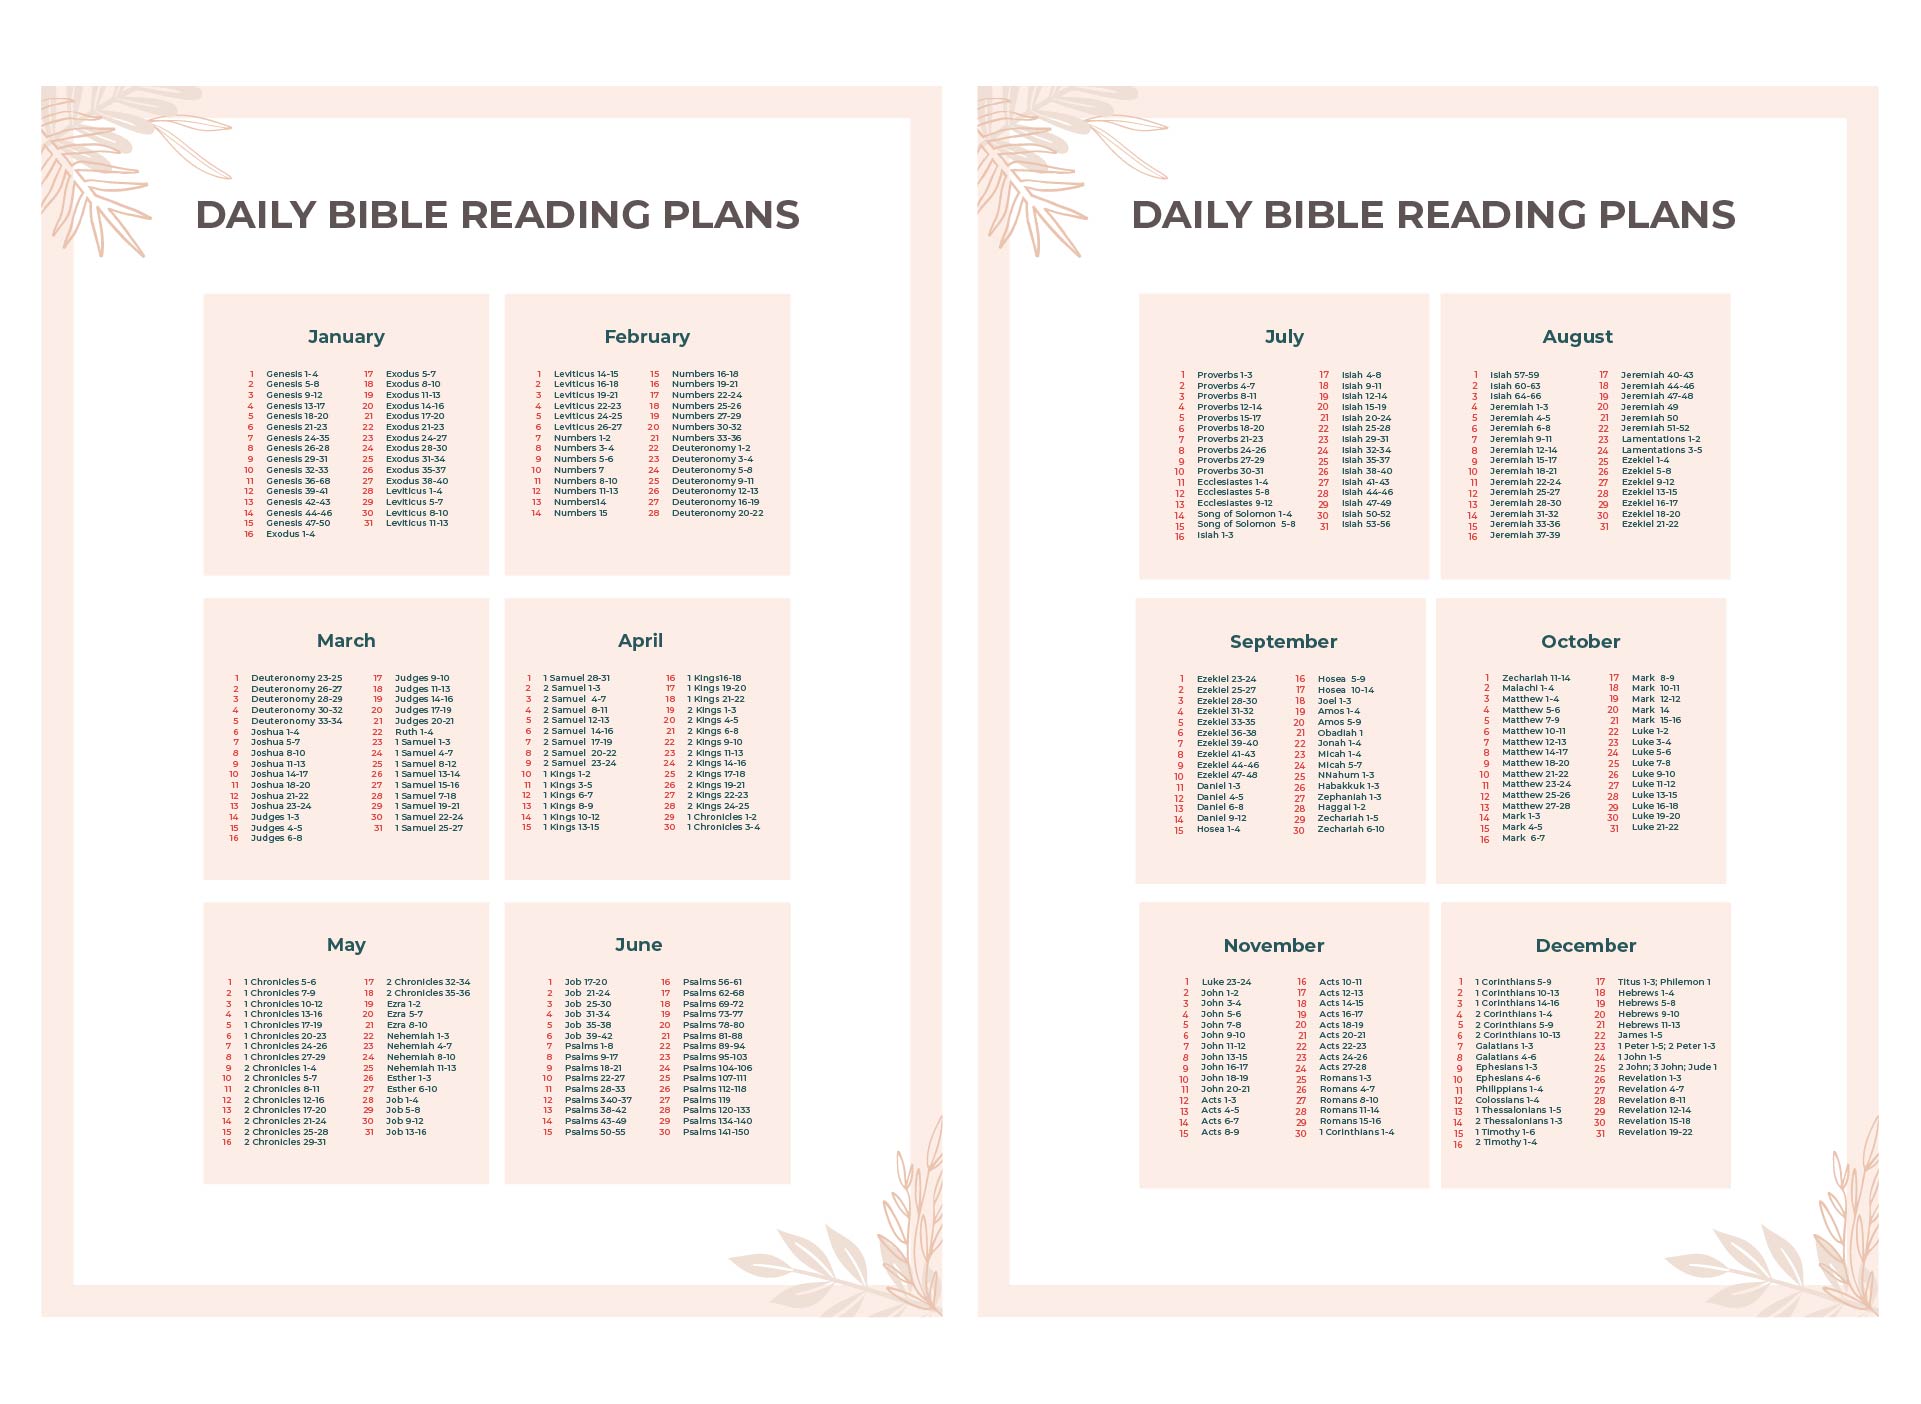 Daily Bible Reading Plans